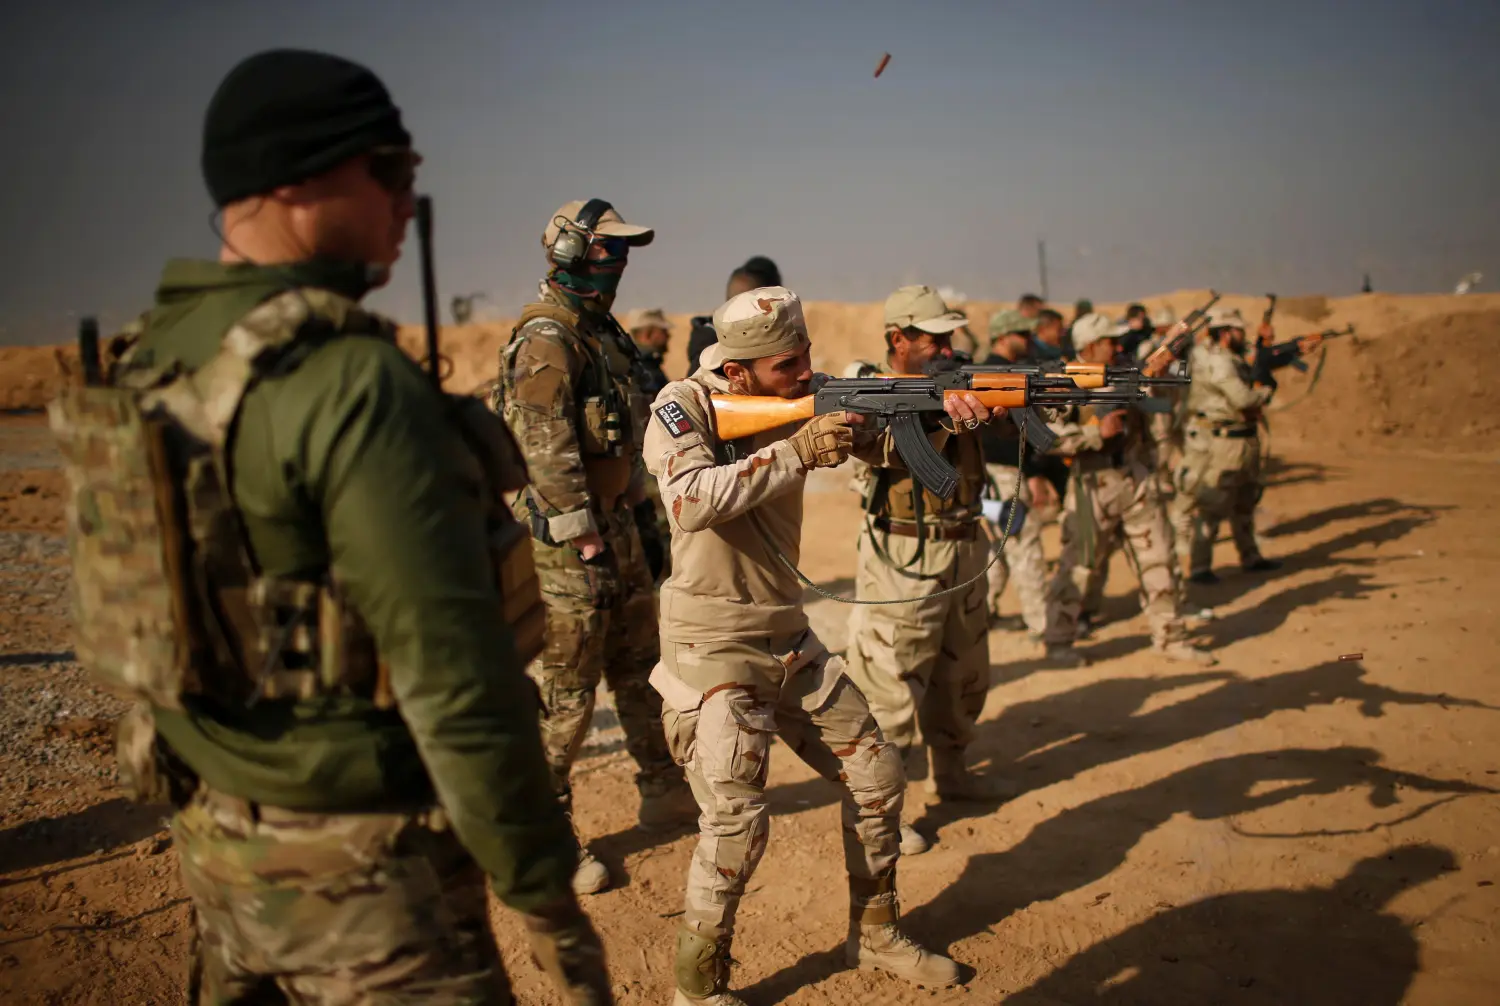 DATE IMPORTED:December 11, 2016Members of the U.S. Army Special Forces provide training for Iraqi fighters from Hashid Shaabi at Makhmur camp in Iraq December 11, 2016. REUTERS/Mohammed Salem